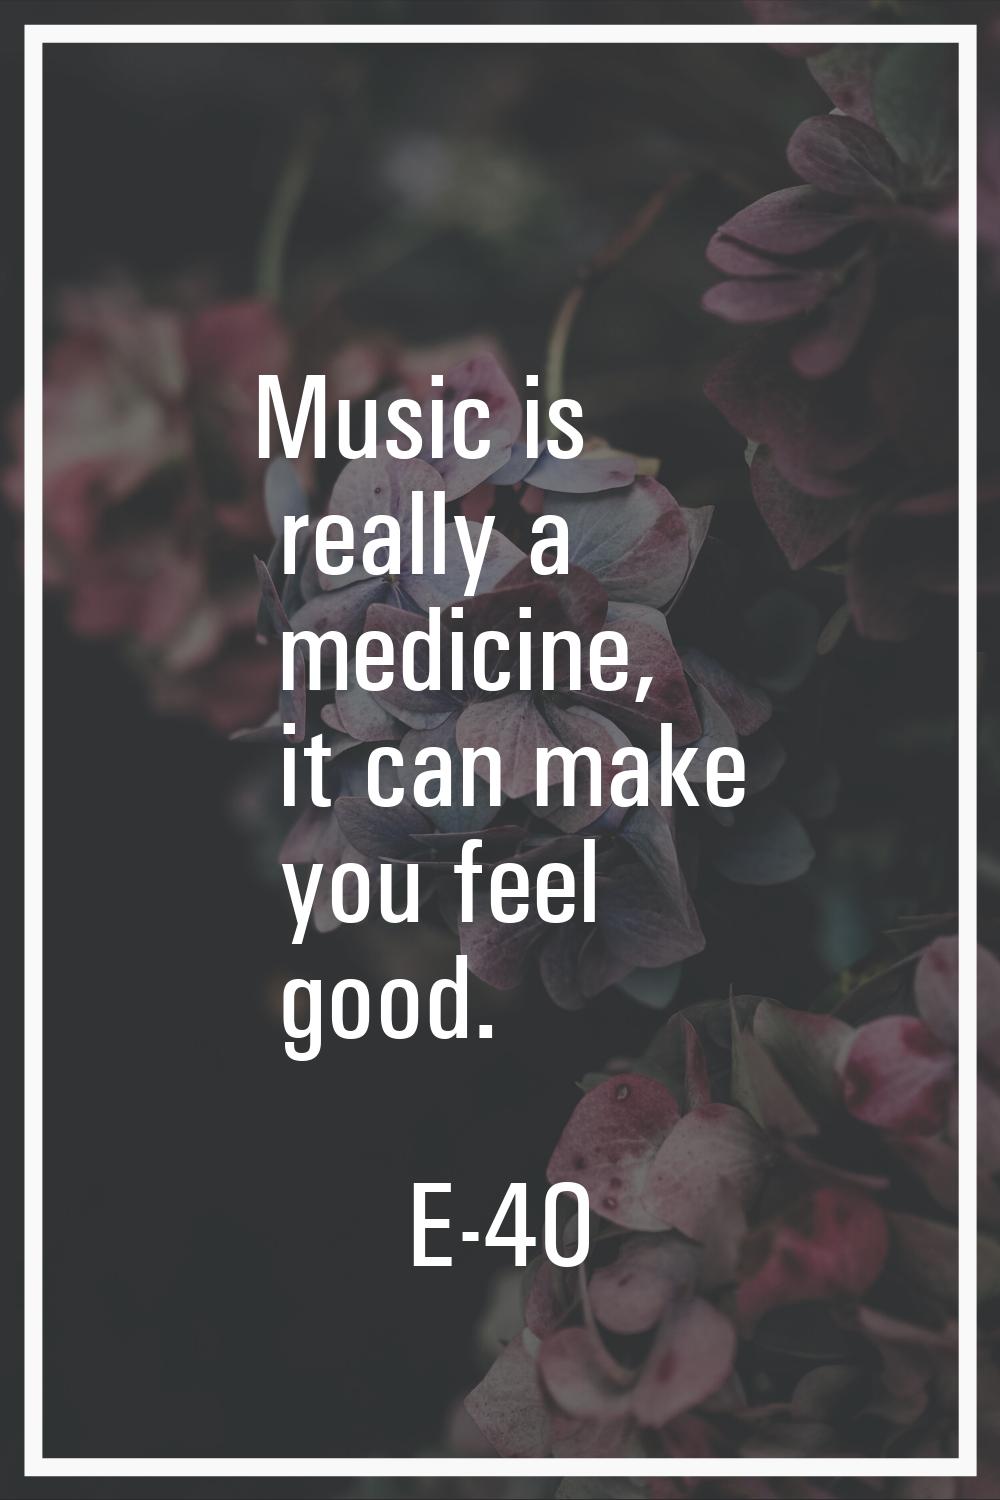 Music is really a medicine, it can make you feel good.